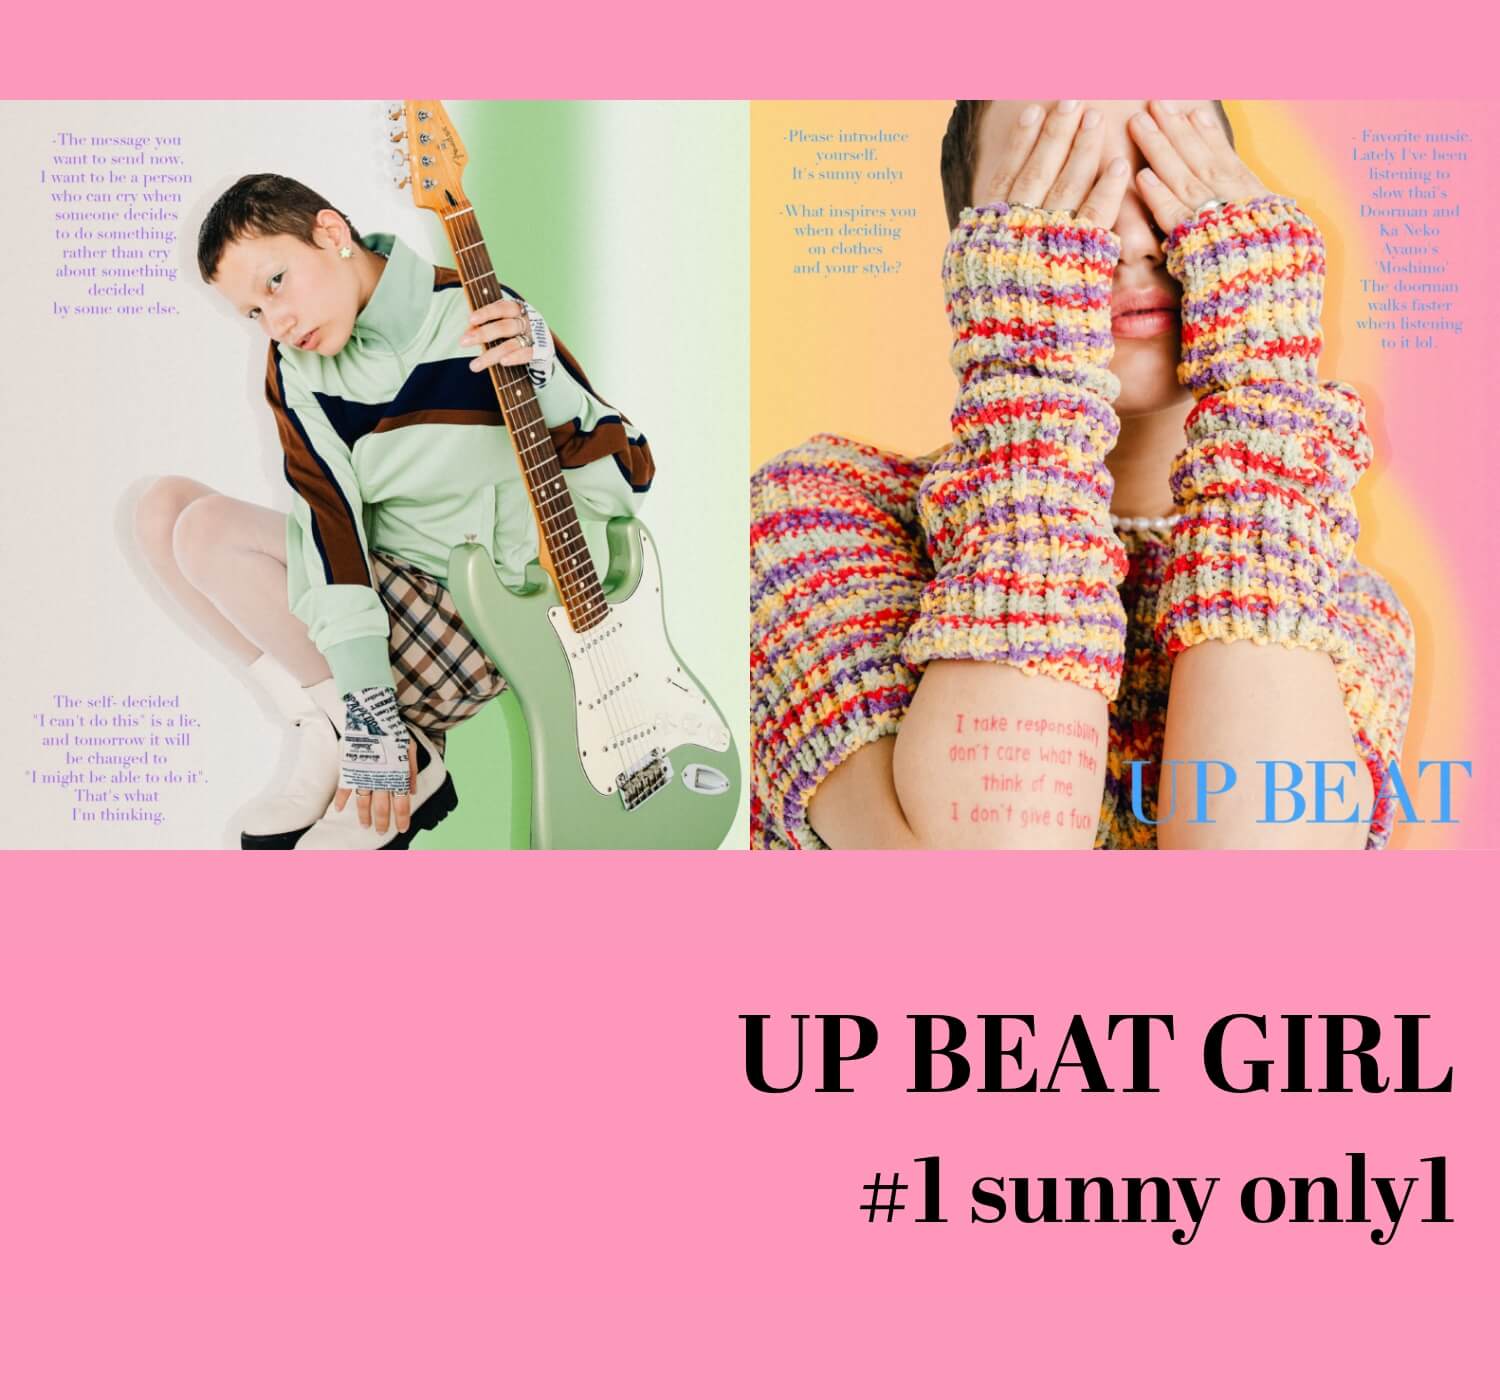 UP BEAT GIRL #1 sunny only1 Oriens 23SS collection.”UP BEAT